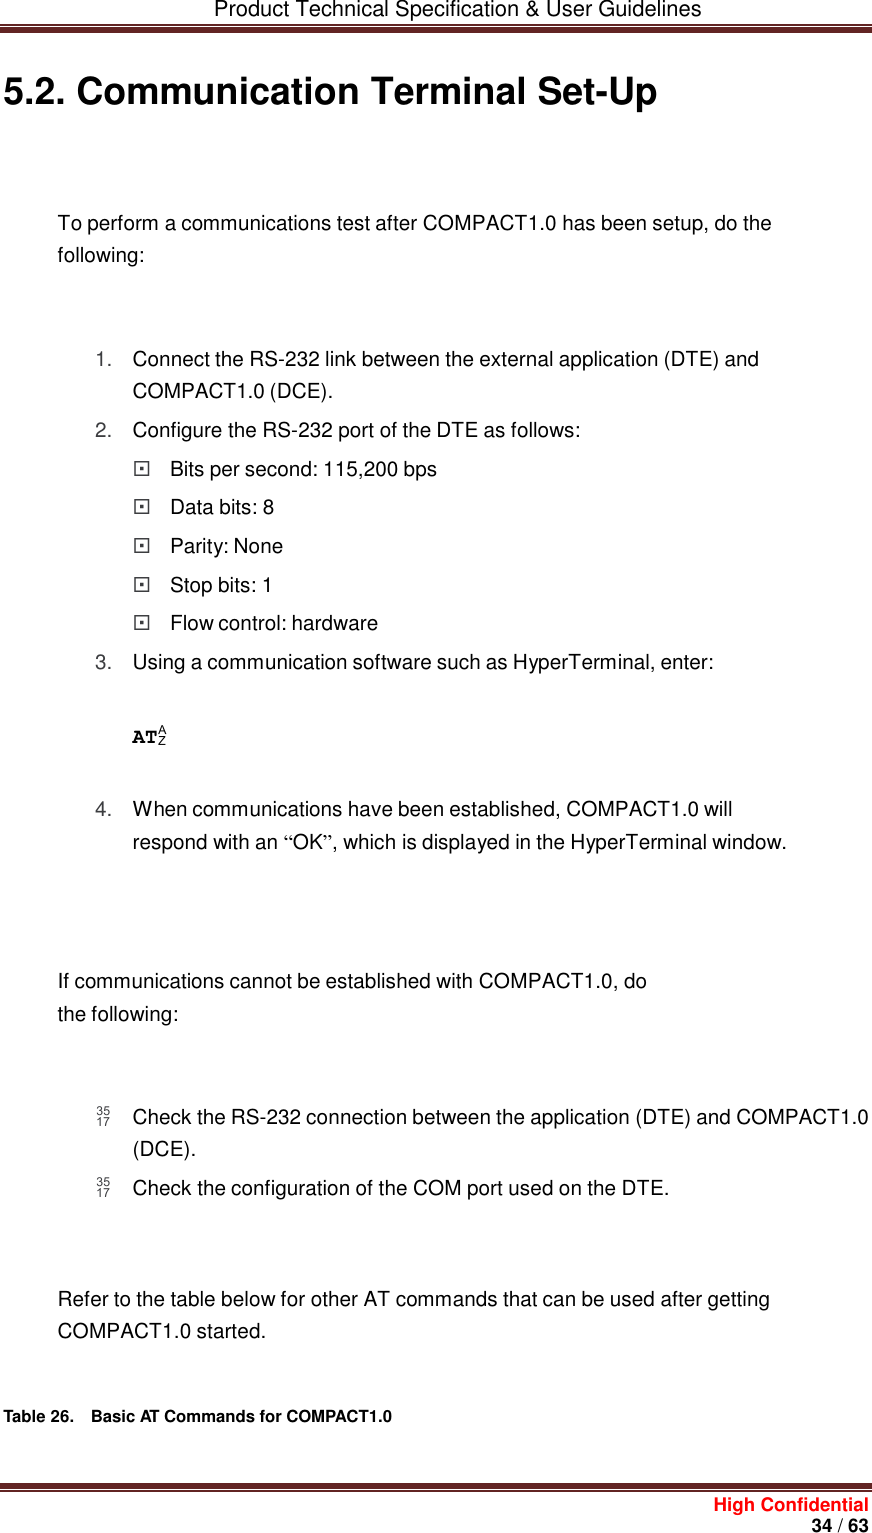         Product Technical Specification &amp; User Guidelines     High Confidential       34 / 63  5.2. Communication Terminal Set-Up    To perform a communications test after COMPACT1.0 has been setup, do the following:    1. Connect the RS-232 link between the external application (DTE) and COMPACT1.0 (DCE). 2. Configure the RS-232 port of the DTE as follows:  Bits per second: 115,200 bps  Data bits: 8  Parity: None  Stop bits: 1  Flow control: hardware 3. Using a communication software such as HyperTerminal, enter:    AT  4. When communications have been established, COMPACT1.0 will respond with an “OK”, which is displayed in the HyperTerminal window.       If communications cannot be established with COMPACT1.0, do the following:     Check the RS-232 connection between the application (DTE) and COMPACT1.0 (DCE).  Check the configuration of the COM port used on the DTE.    Refer to the table below for other AT commands that can be used after getting COMPACT1.0 started.    Table 26.  Basic AT Commands for COMPACT1.0   